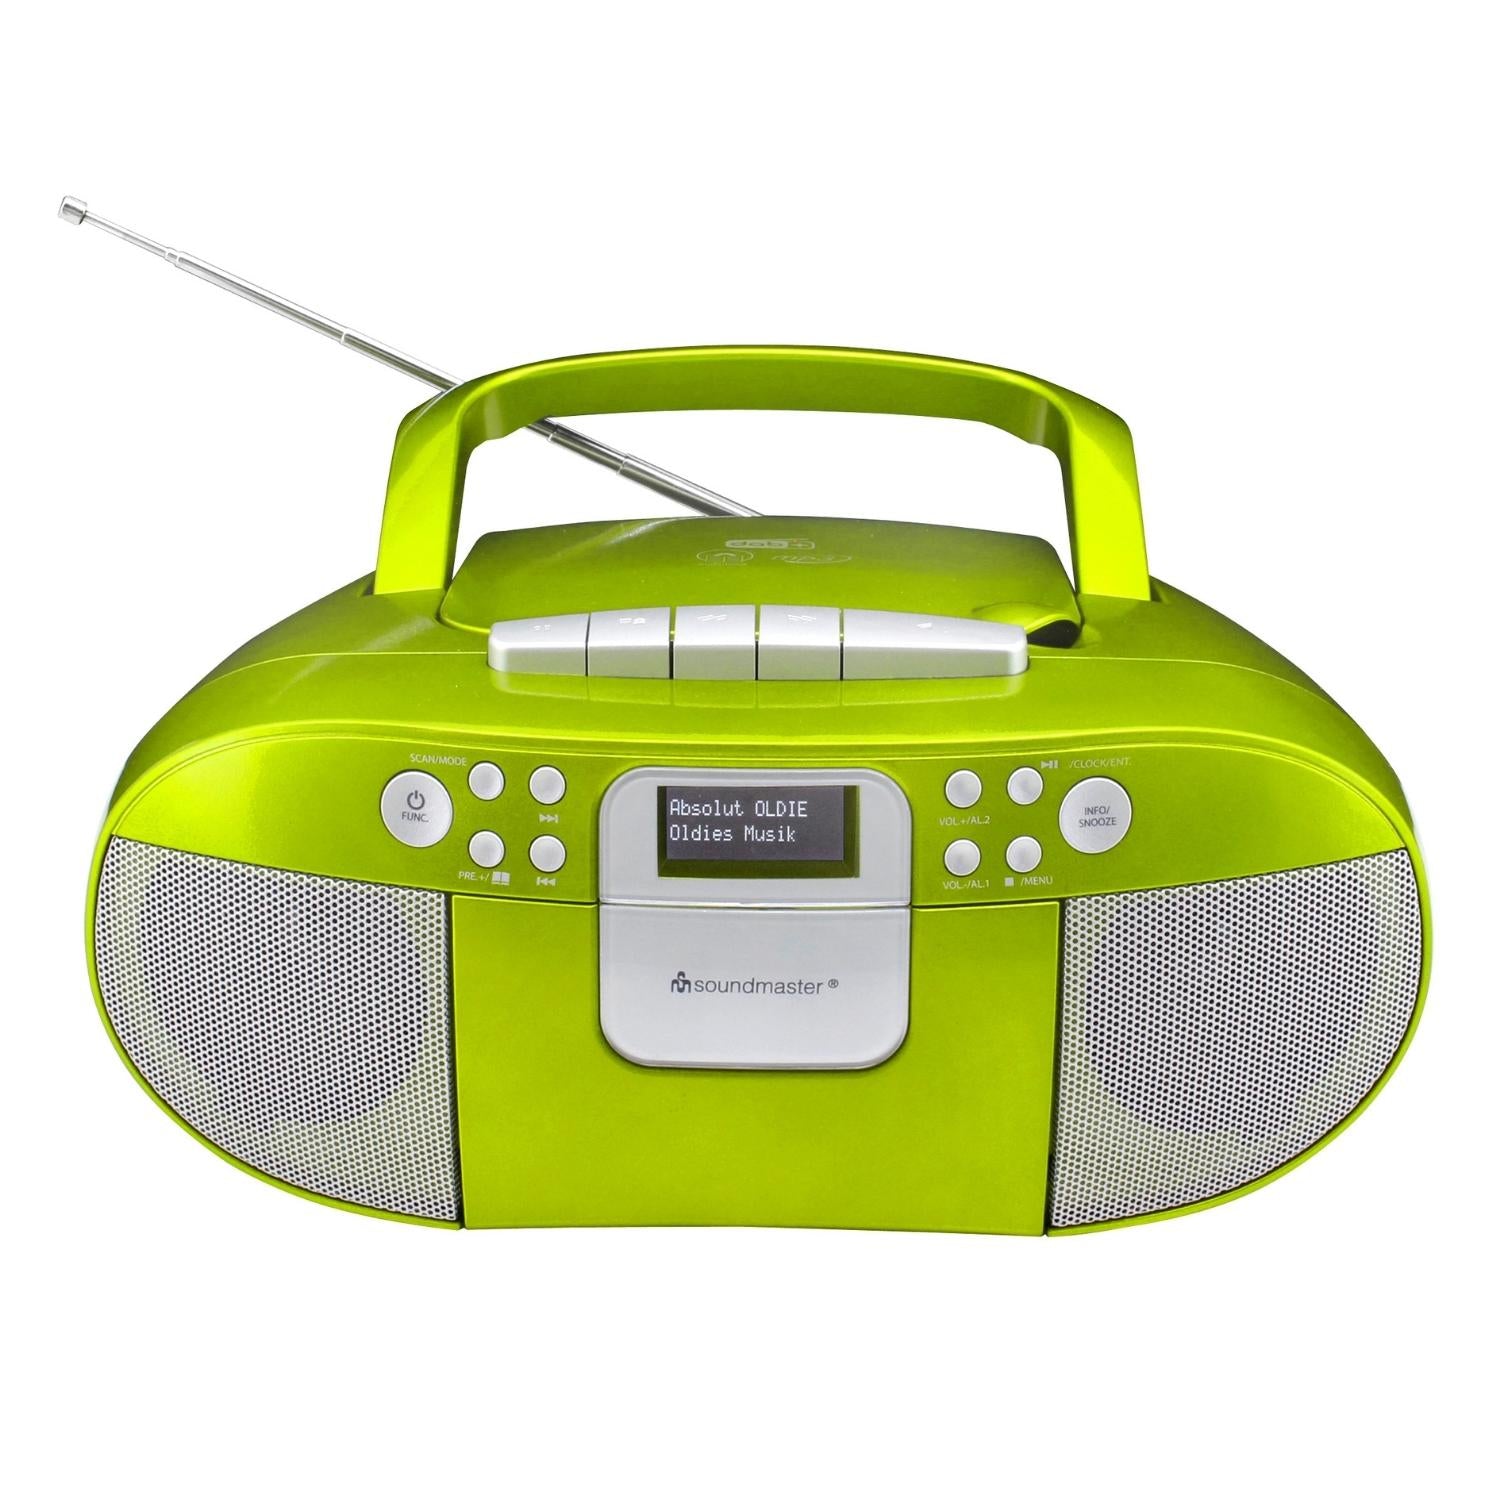 Soundmaster SCD7800GR Boombox DAB+ CD MP3 cassette recorder with USB alarm clock function, audio book function